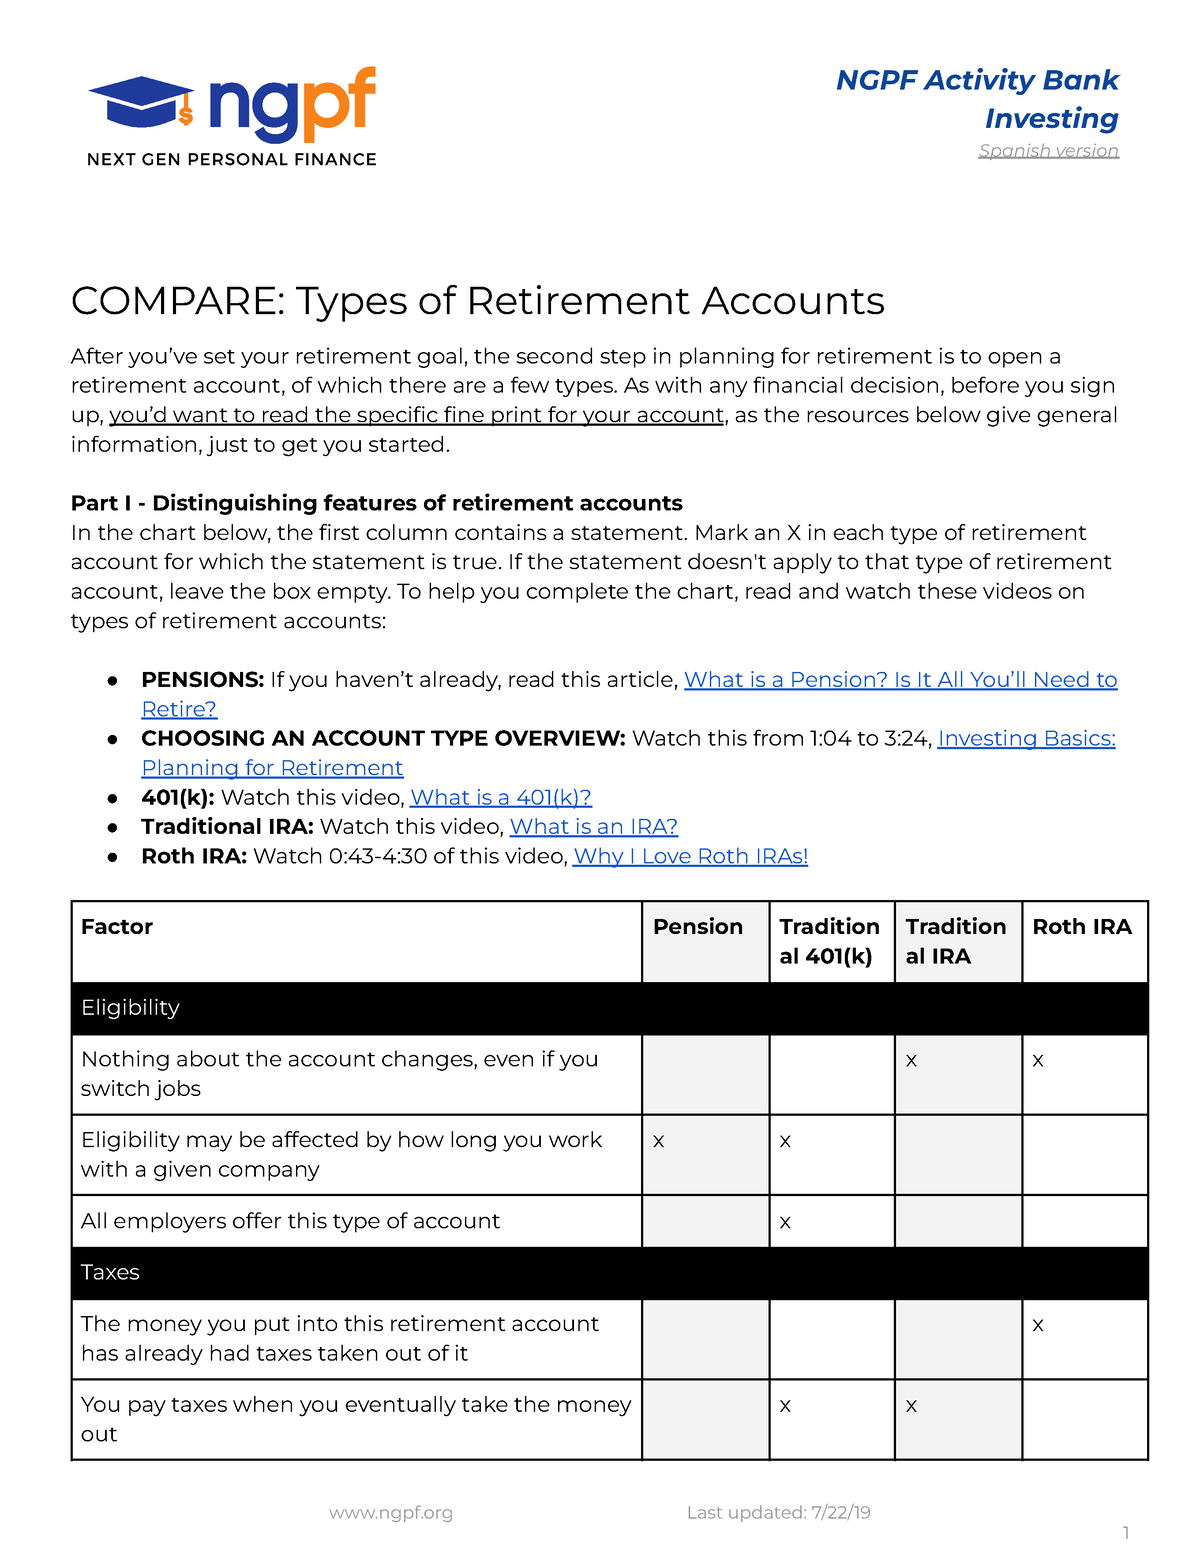 compare-types-of-retirement-accounts-ngpf-activity-bank-investing